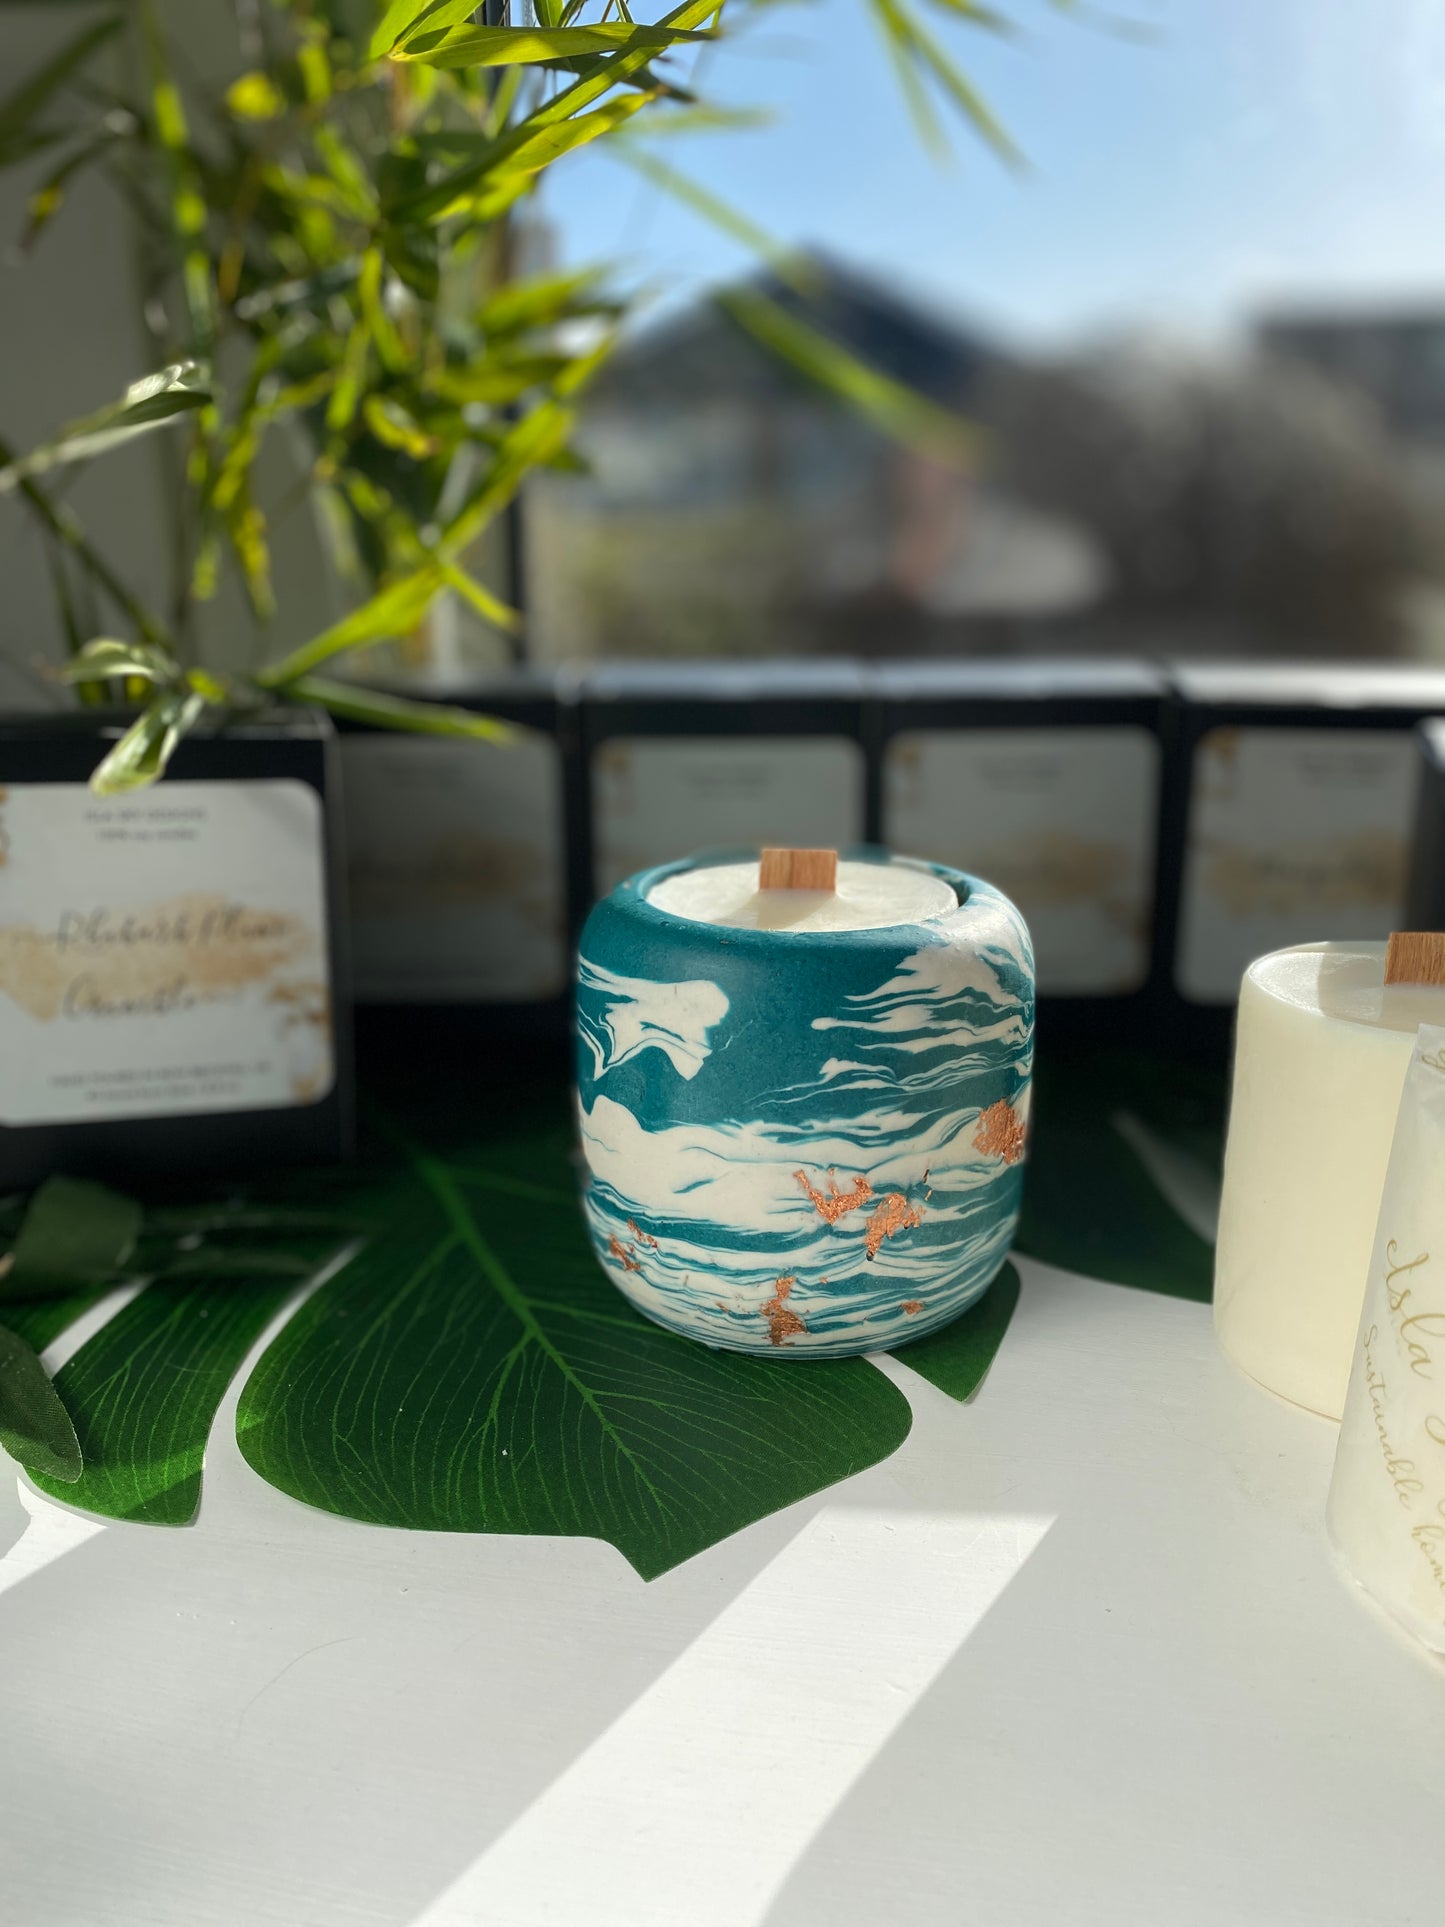 "Isla" Refillable Candle - Teal & Copper Marble